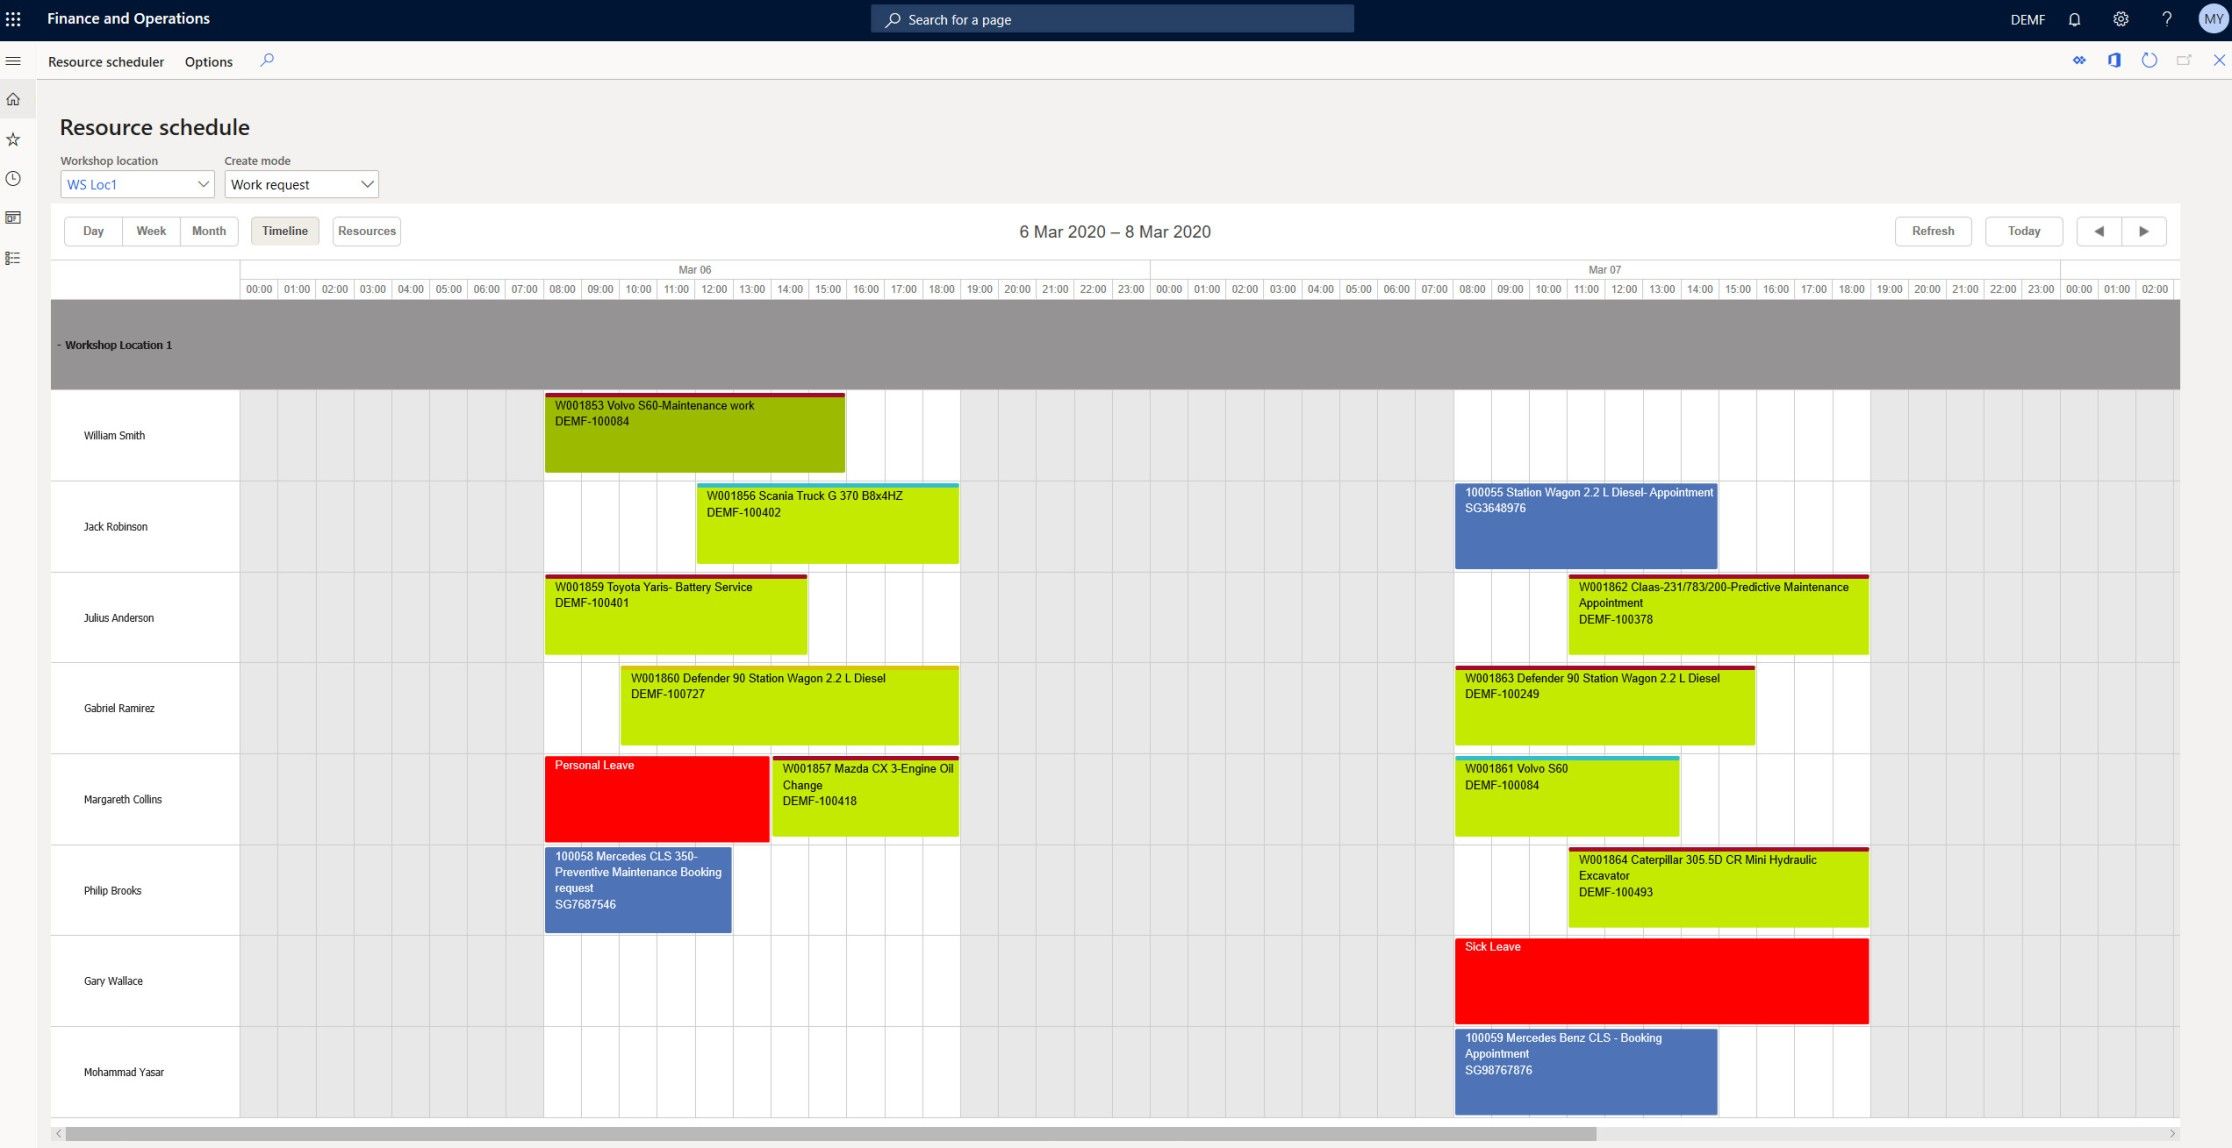 5 Features to Optimize and Transform Technician Job Scheduling